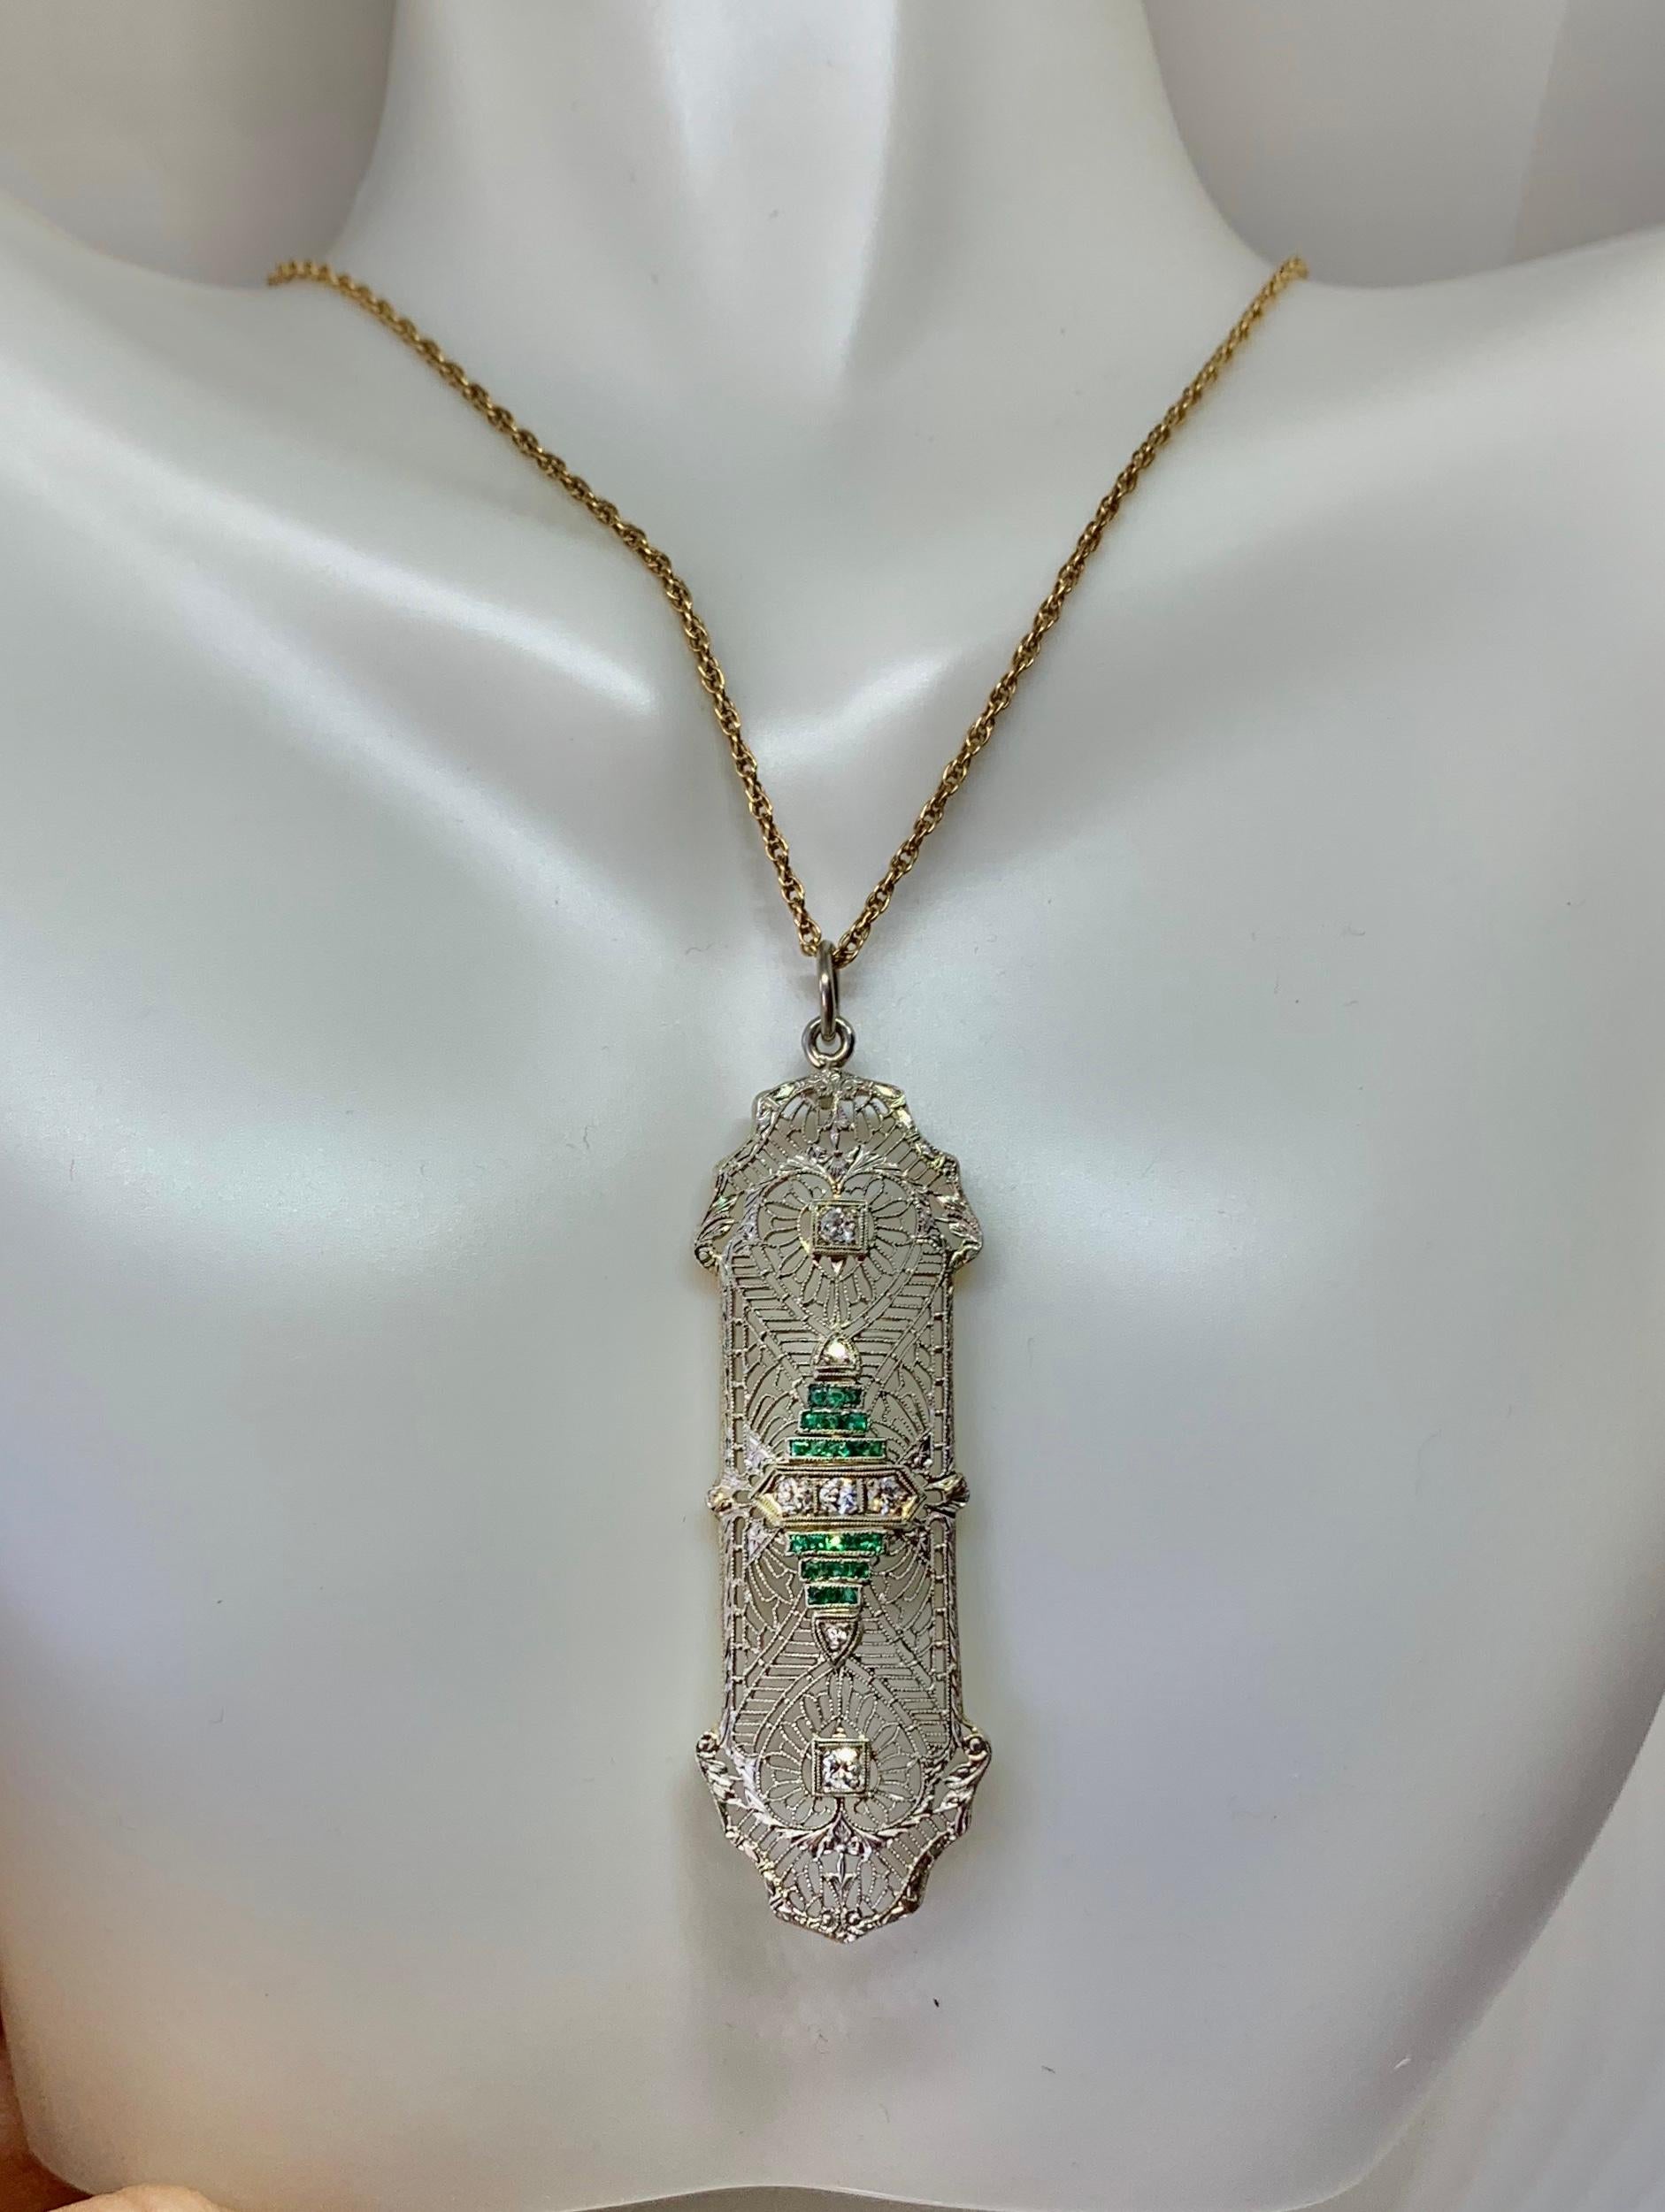 This is a very special antique Edwardian, Art Deco pendant with five sparkling Old Mine Cut Diamonds and 24 square cut Emeralds in an exquisite delicate refined filigree design in 14 Karat White Gold.  This is one of the most beautiful Art Deco